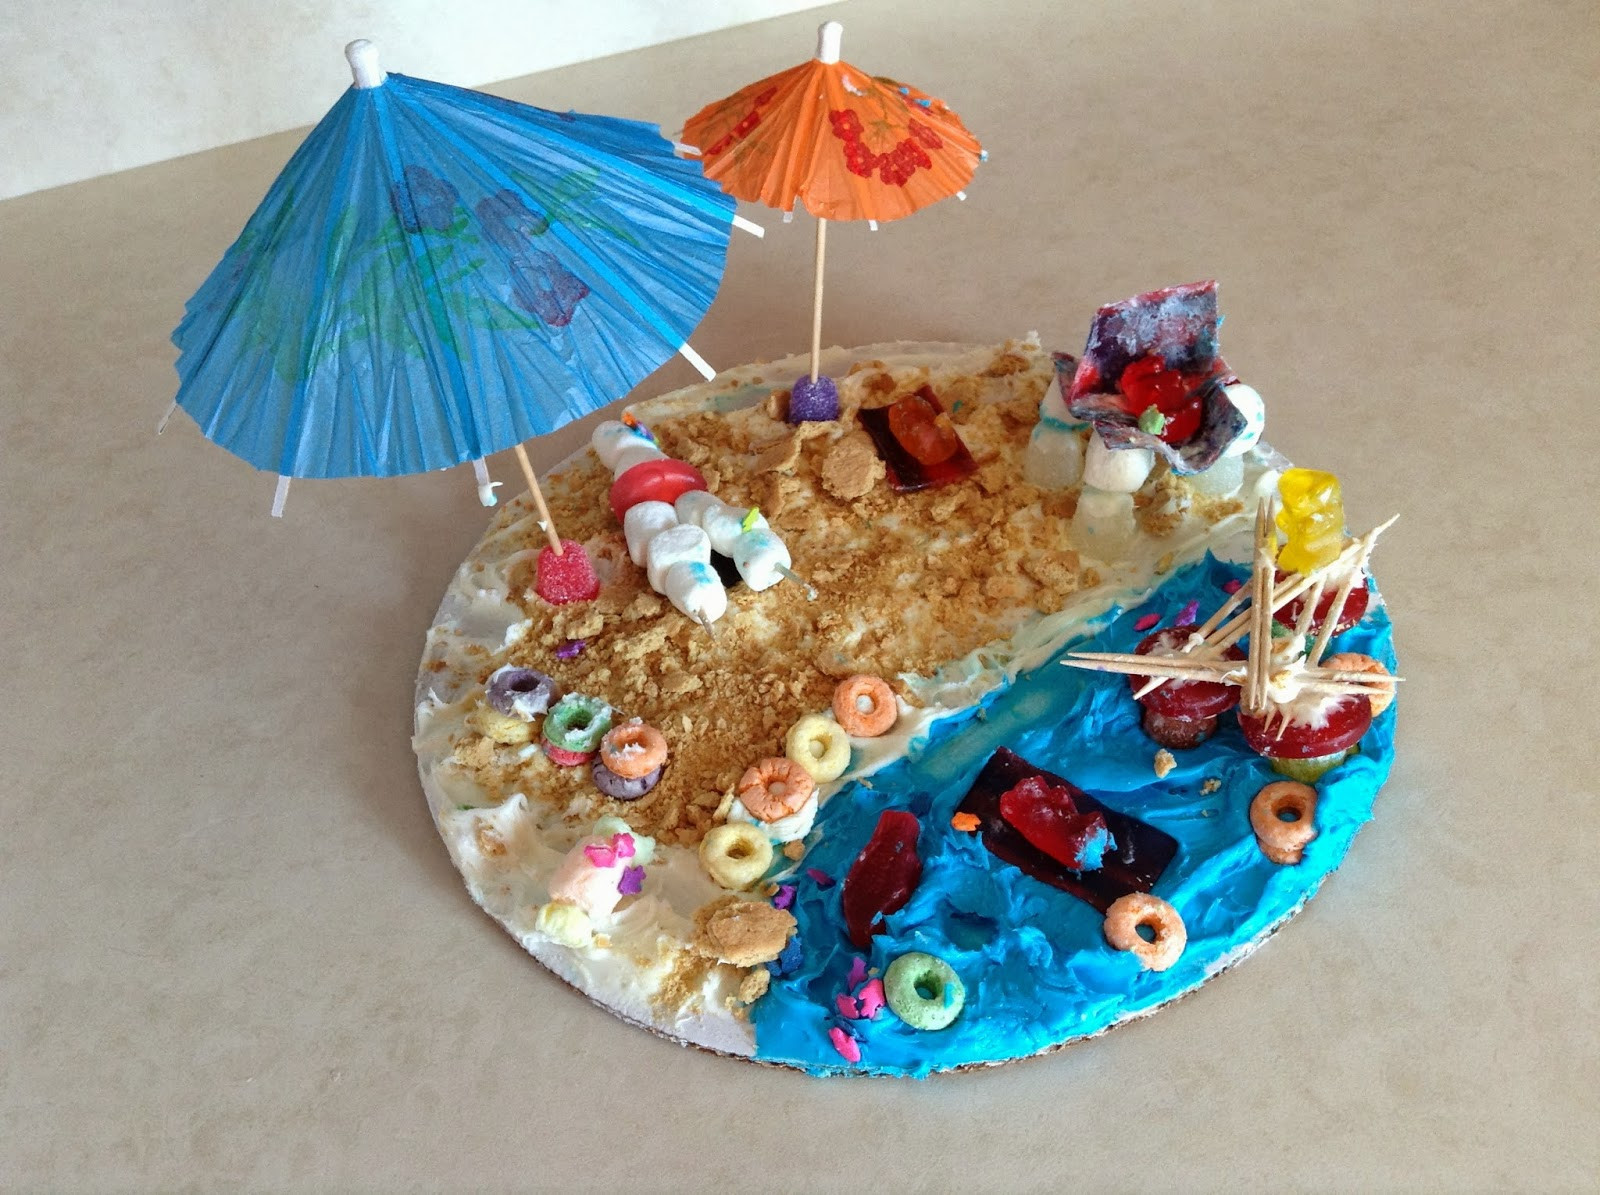 Arts And Crafts Activities For Adults
 Holly s Arts and Crafts Corner Summer Recap Independent